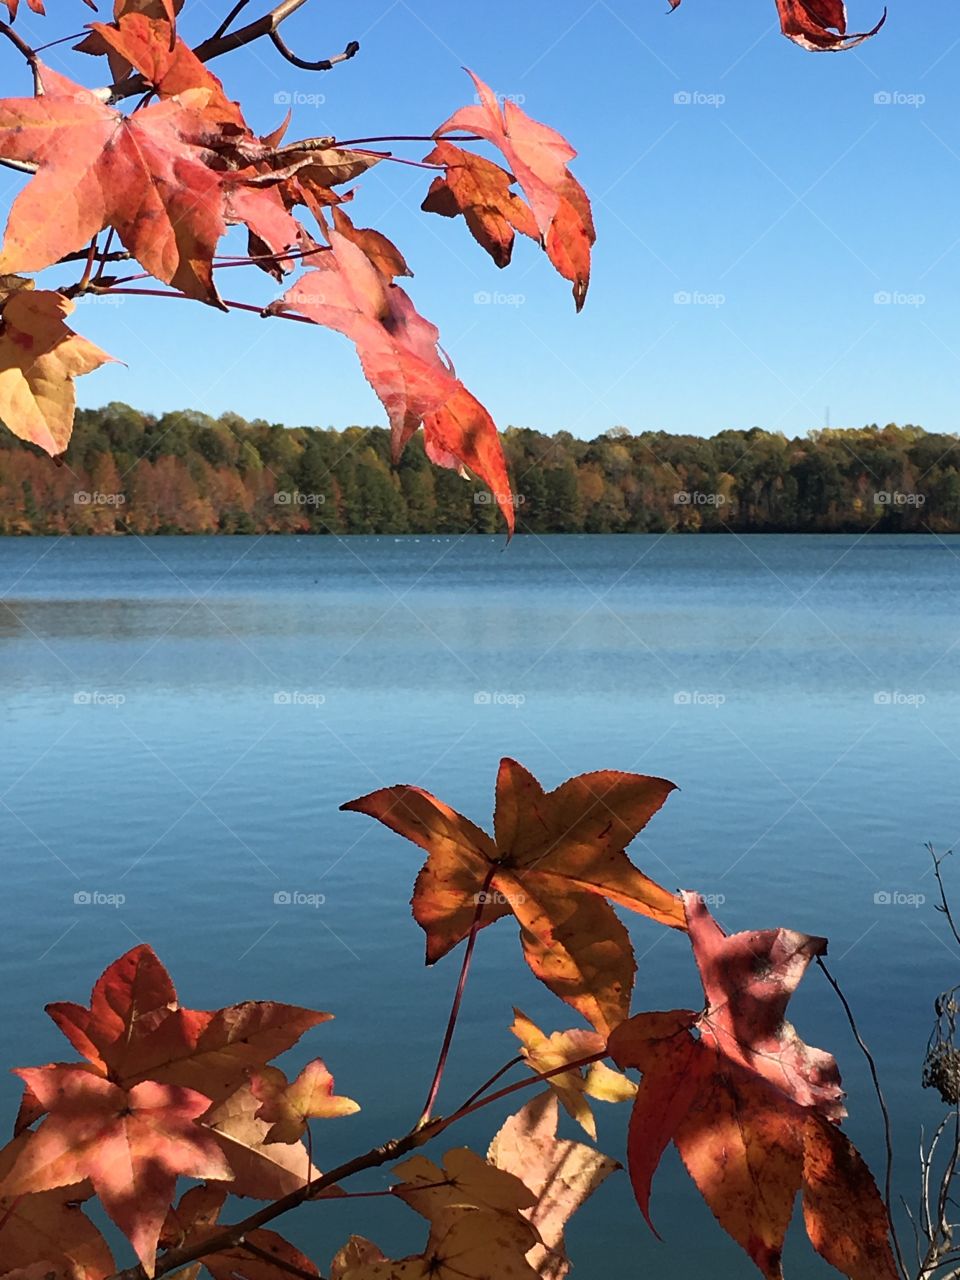 Fall colors around the lake